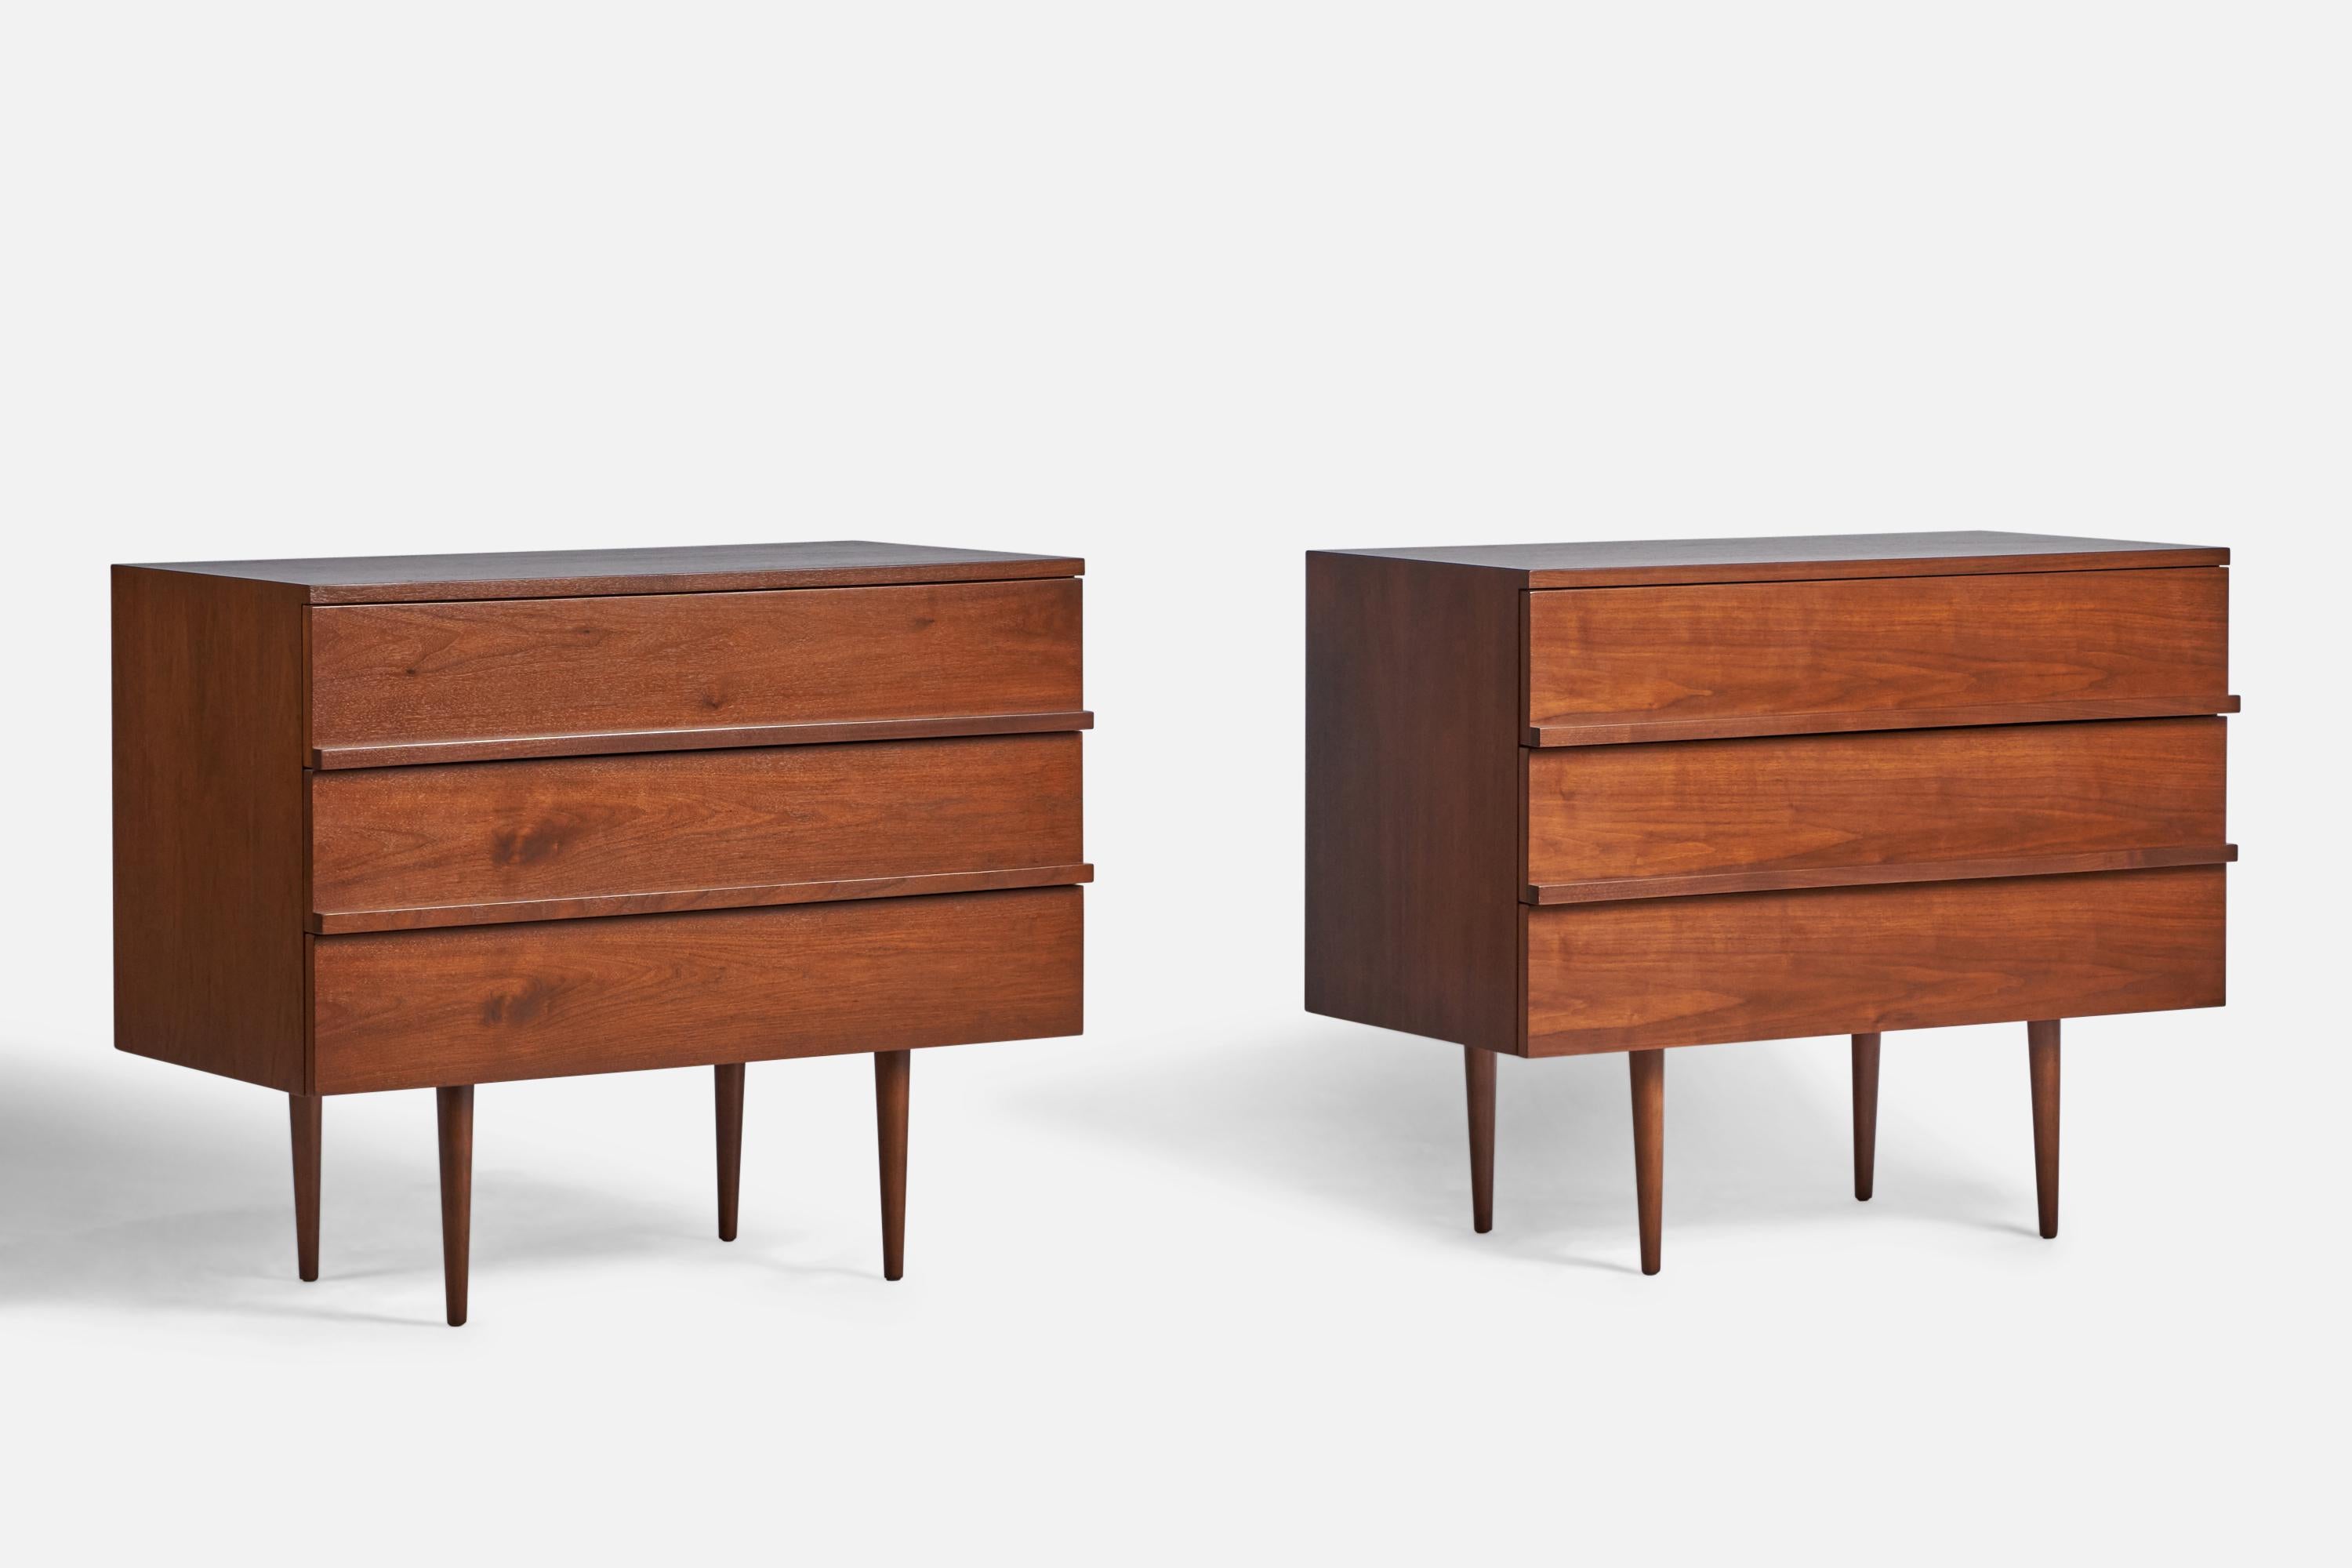 A pair of walnut chests of drawers designed by Mel Smilow and produced by Smilow-Thielle, USA, 1950s.